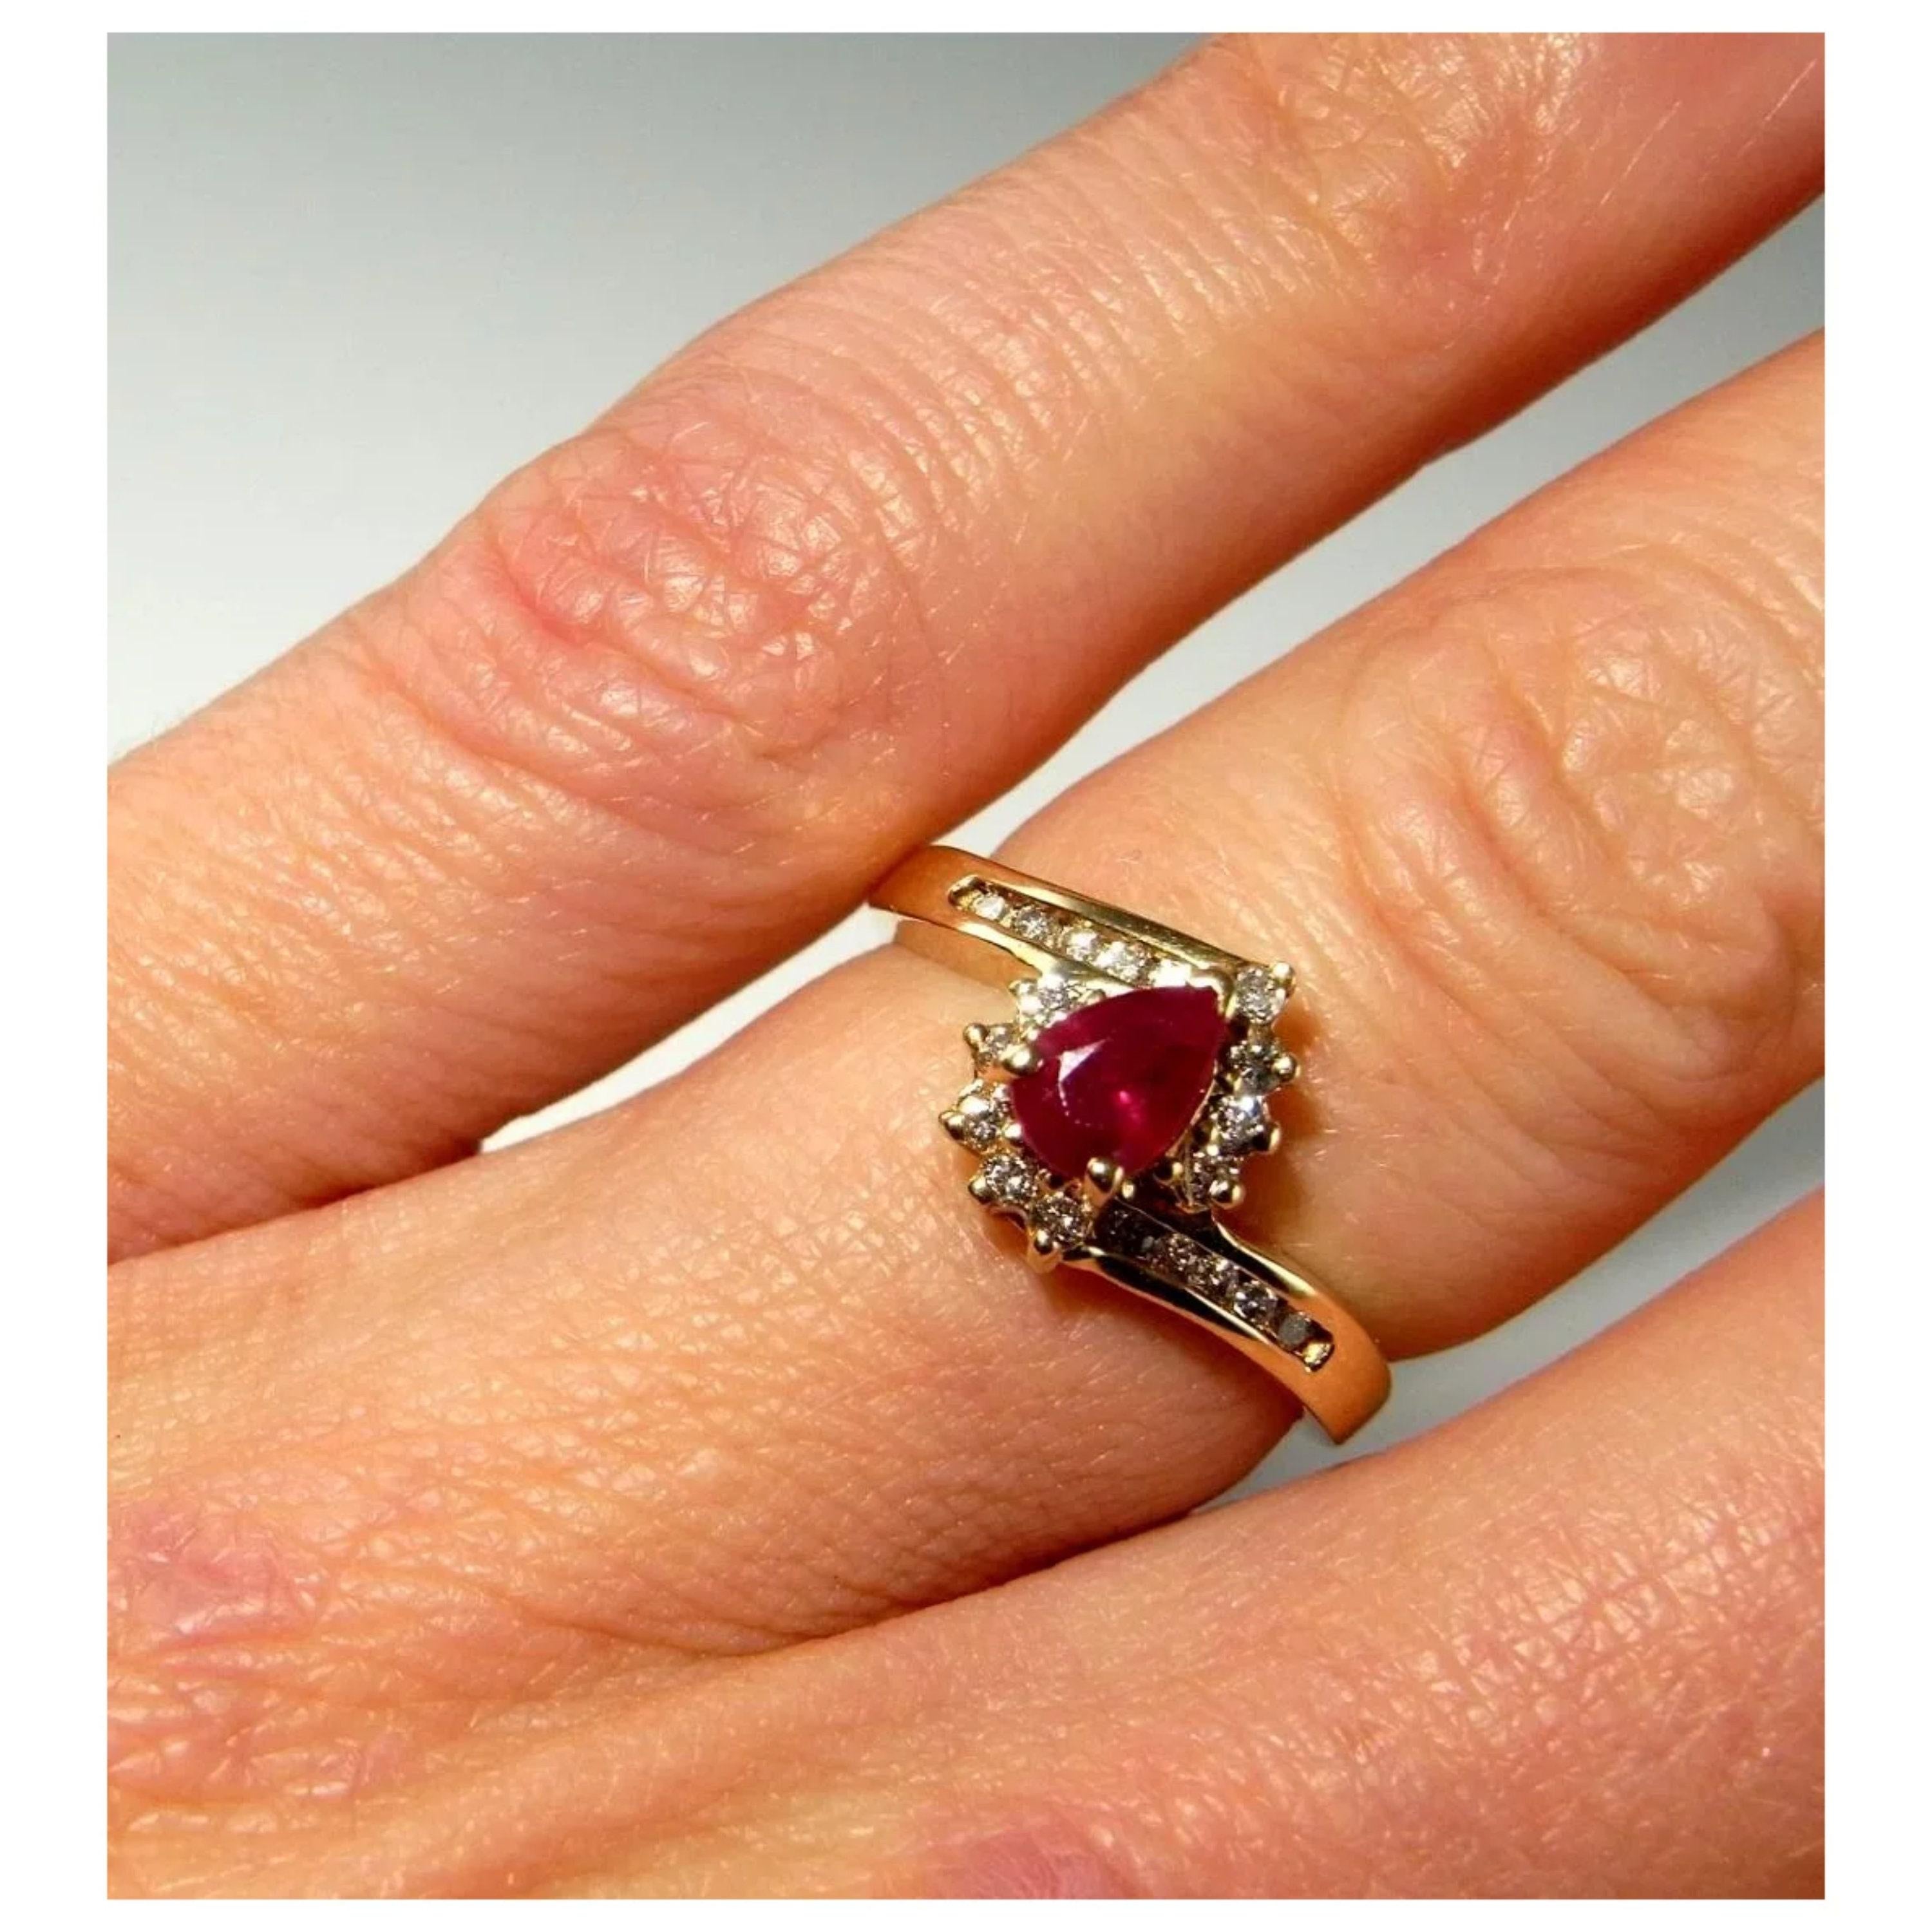 For Sale:  Certified Pear Cut Ruby and Diamond Yellow Gold Engagement Ring Wedding Ring 5